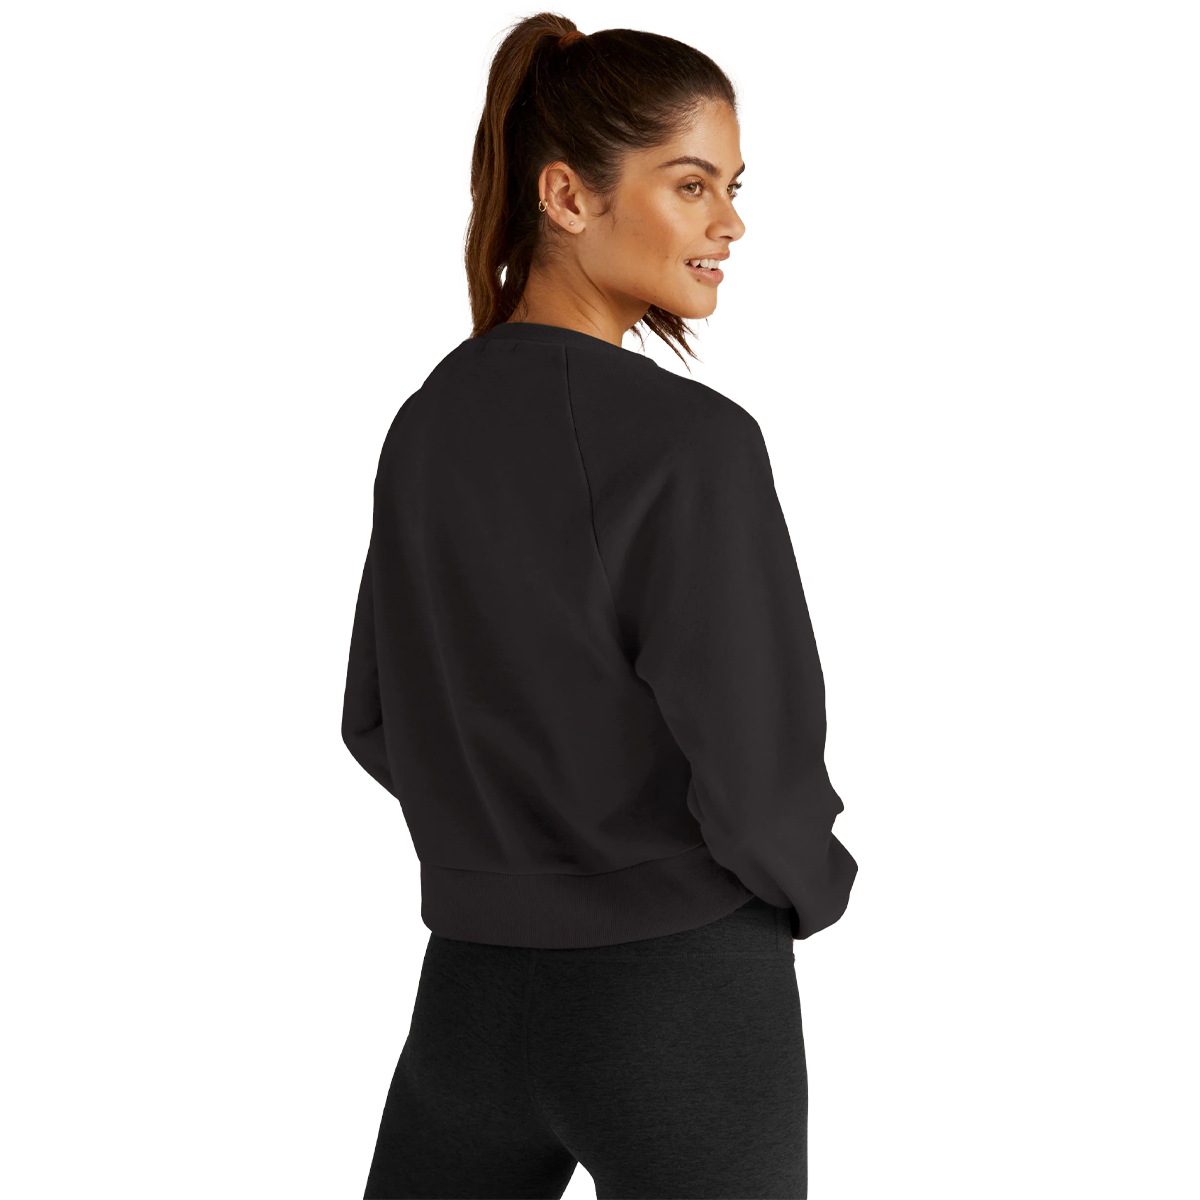 Women's Uplift Cropped Pullover alternate view